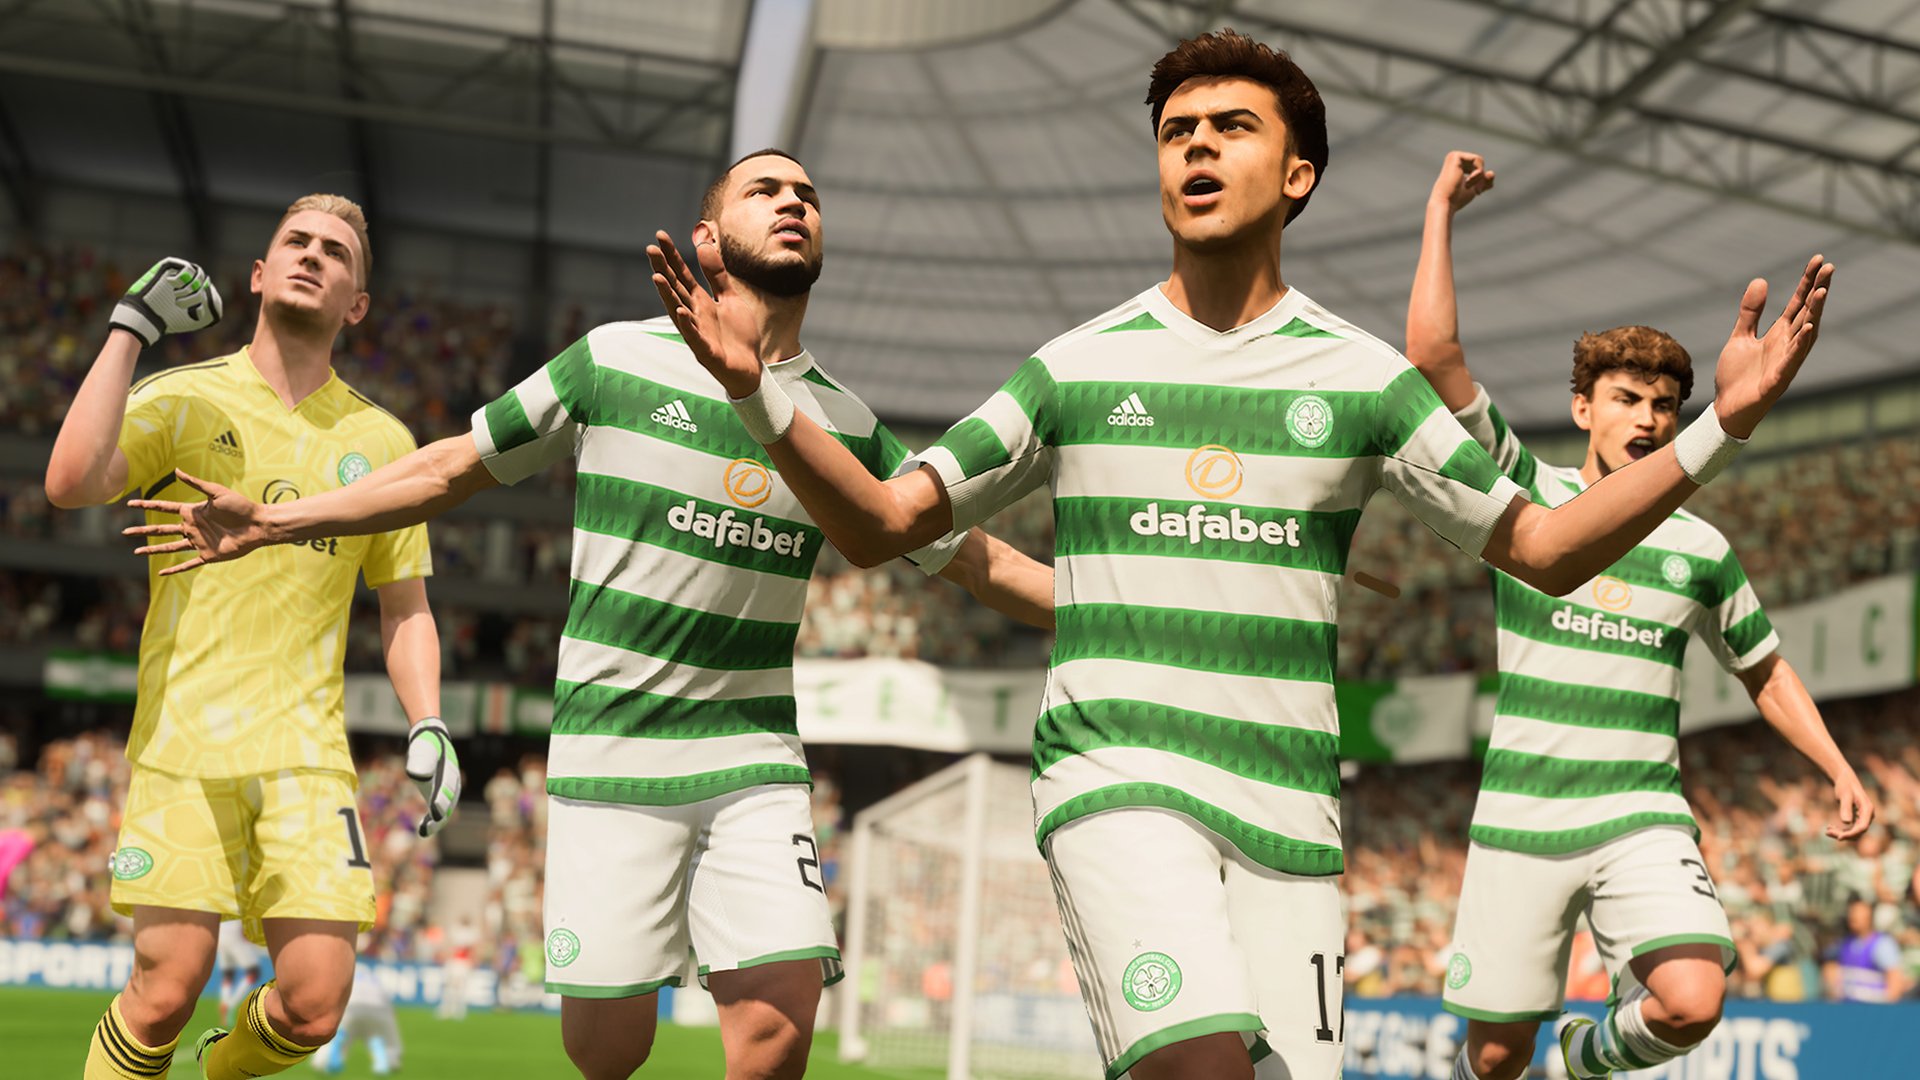 How to play FIFA 23 early: EA Play early access & 10 hour trial